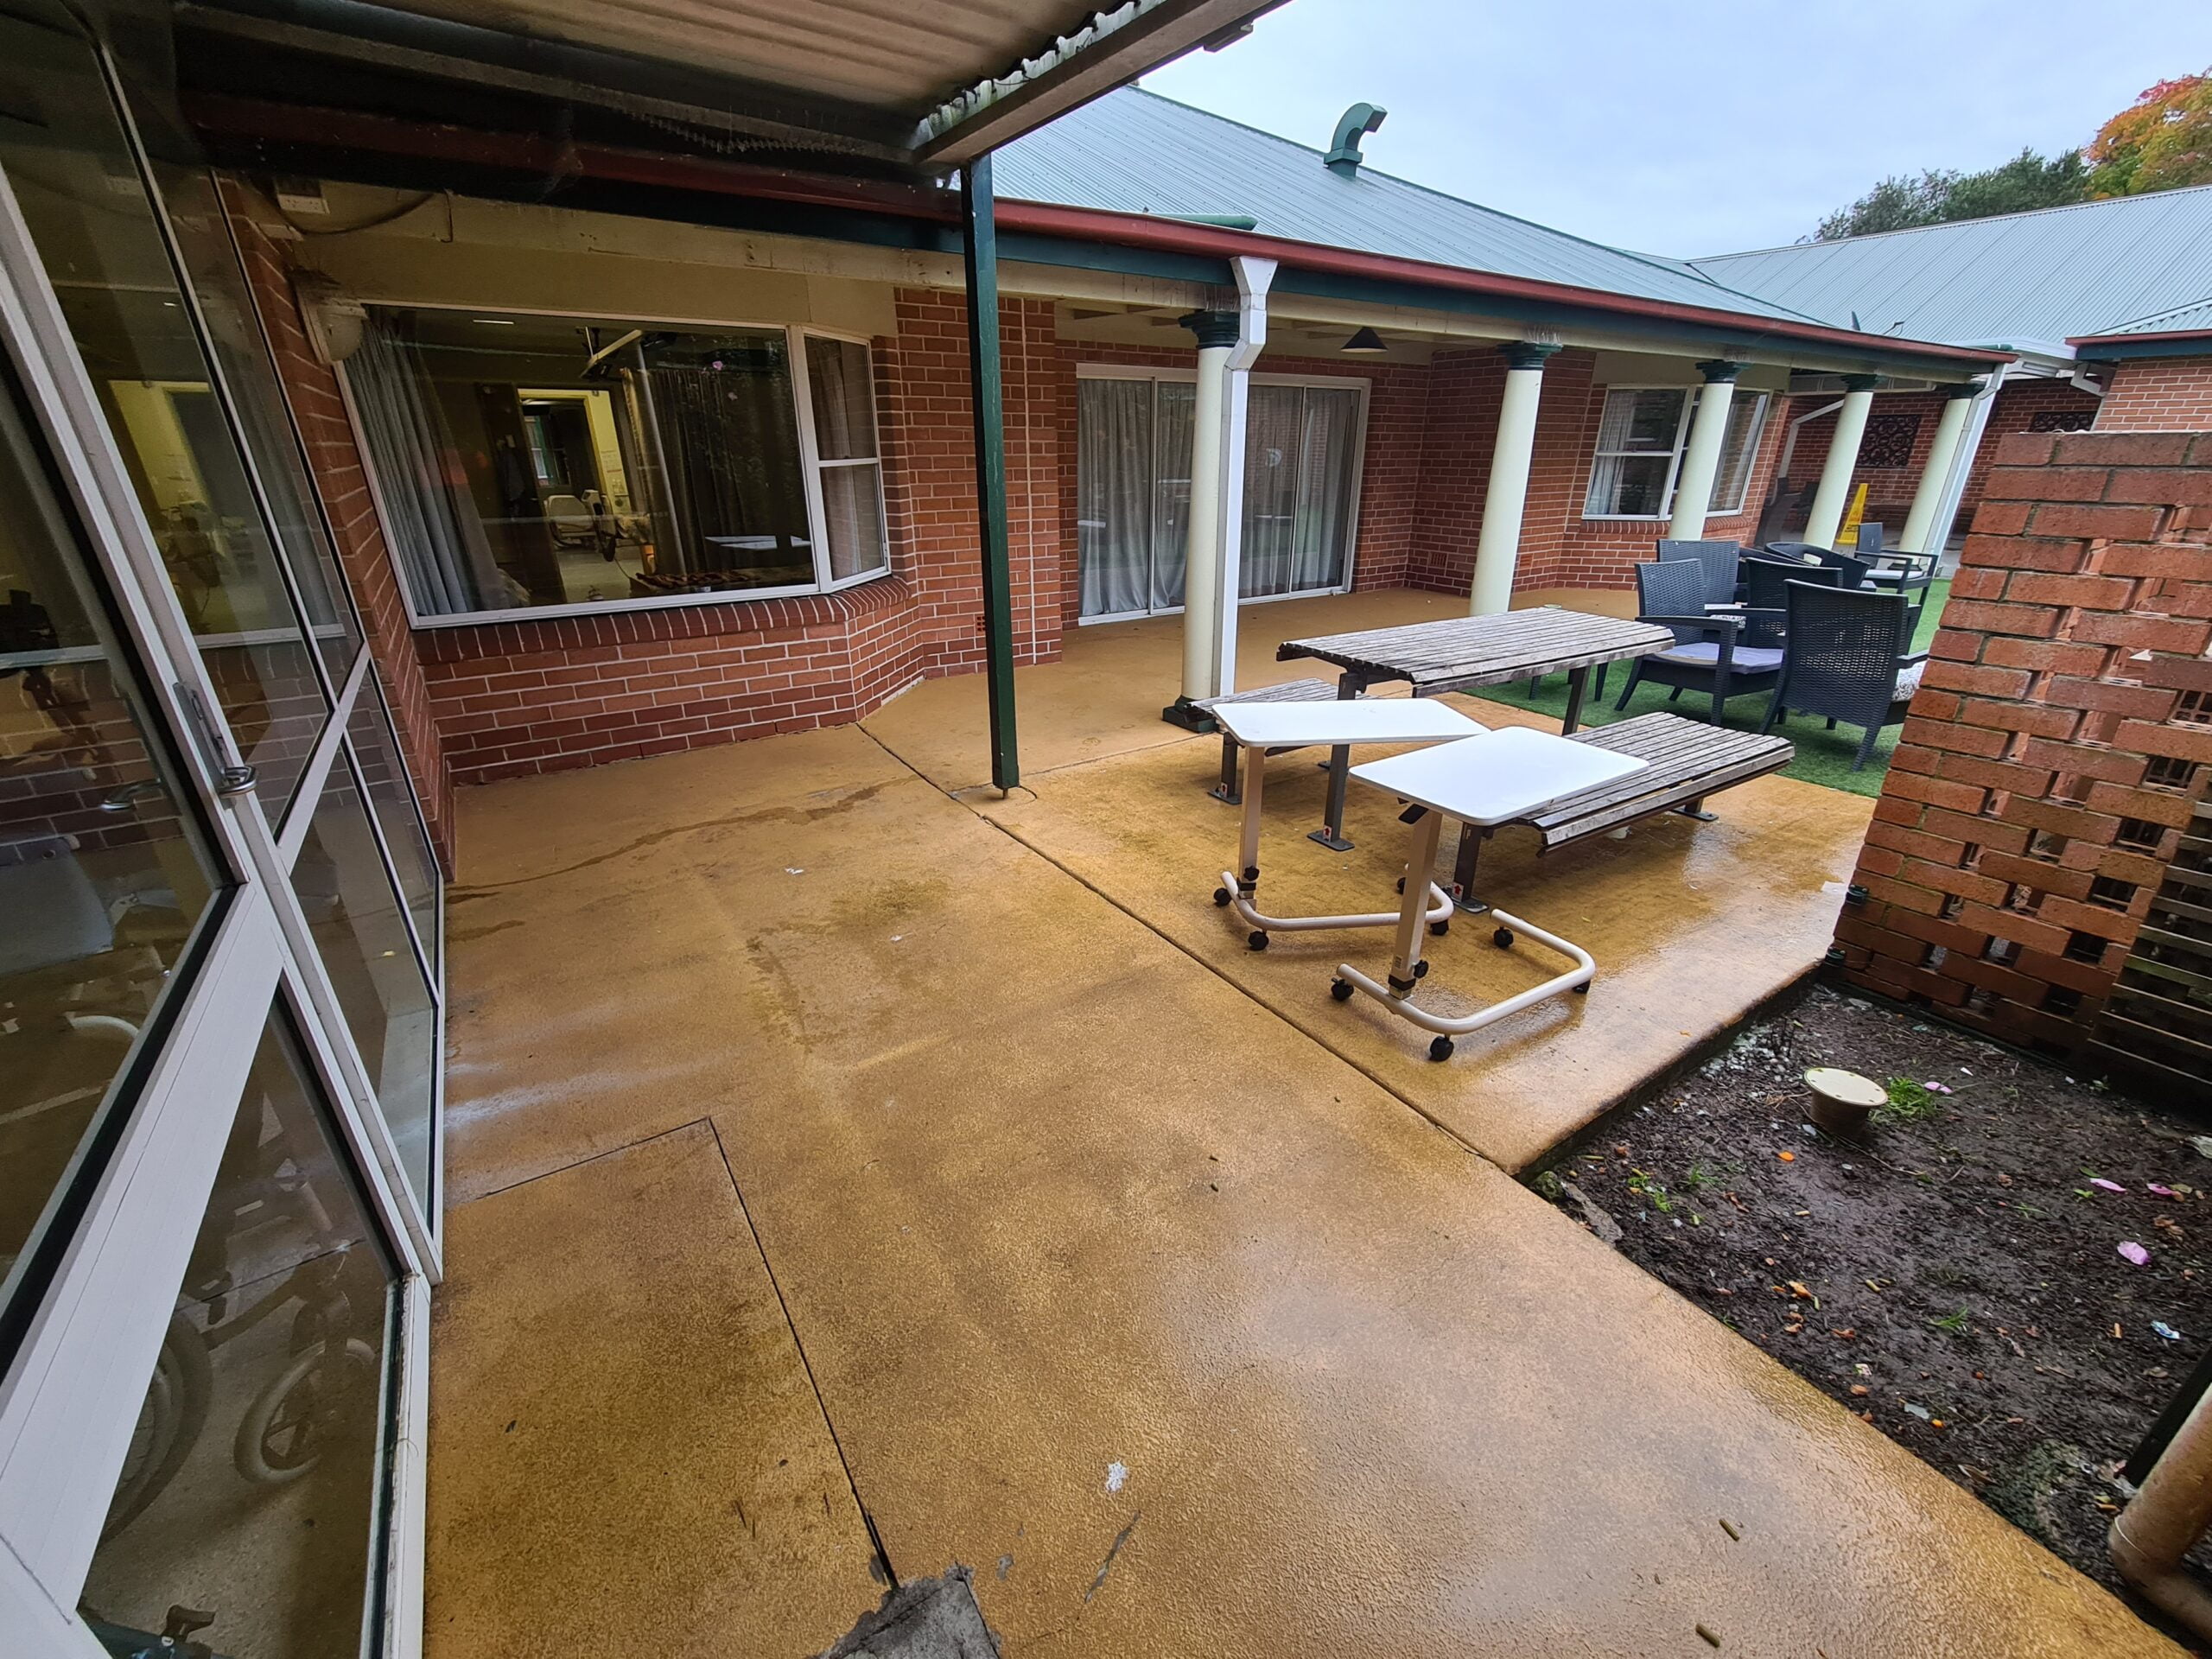 pressure cleaning and washing services in Sydney and surrounding areas.